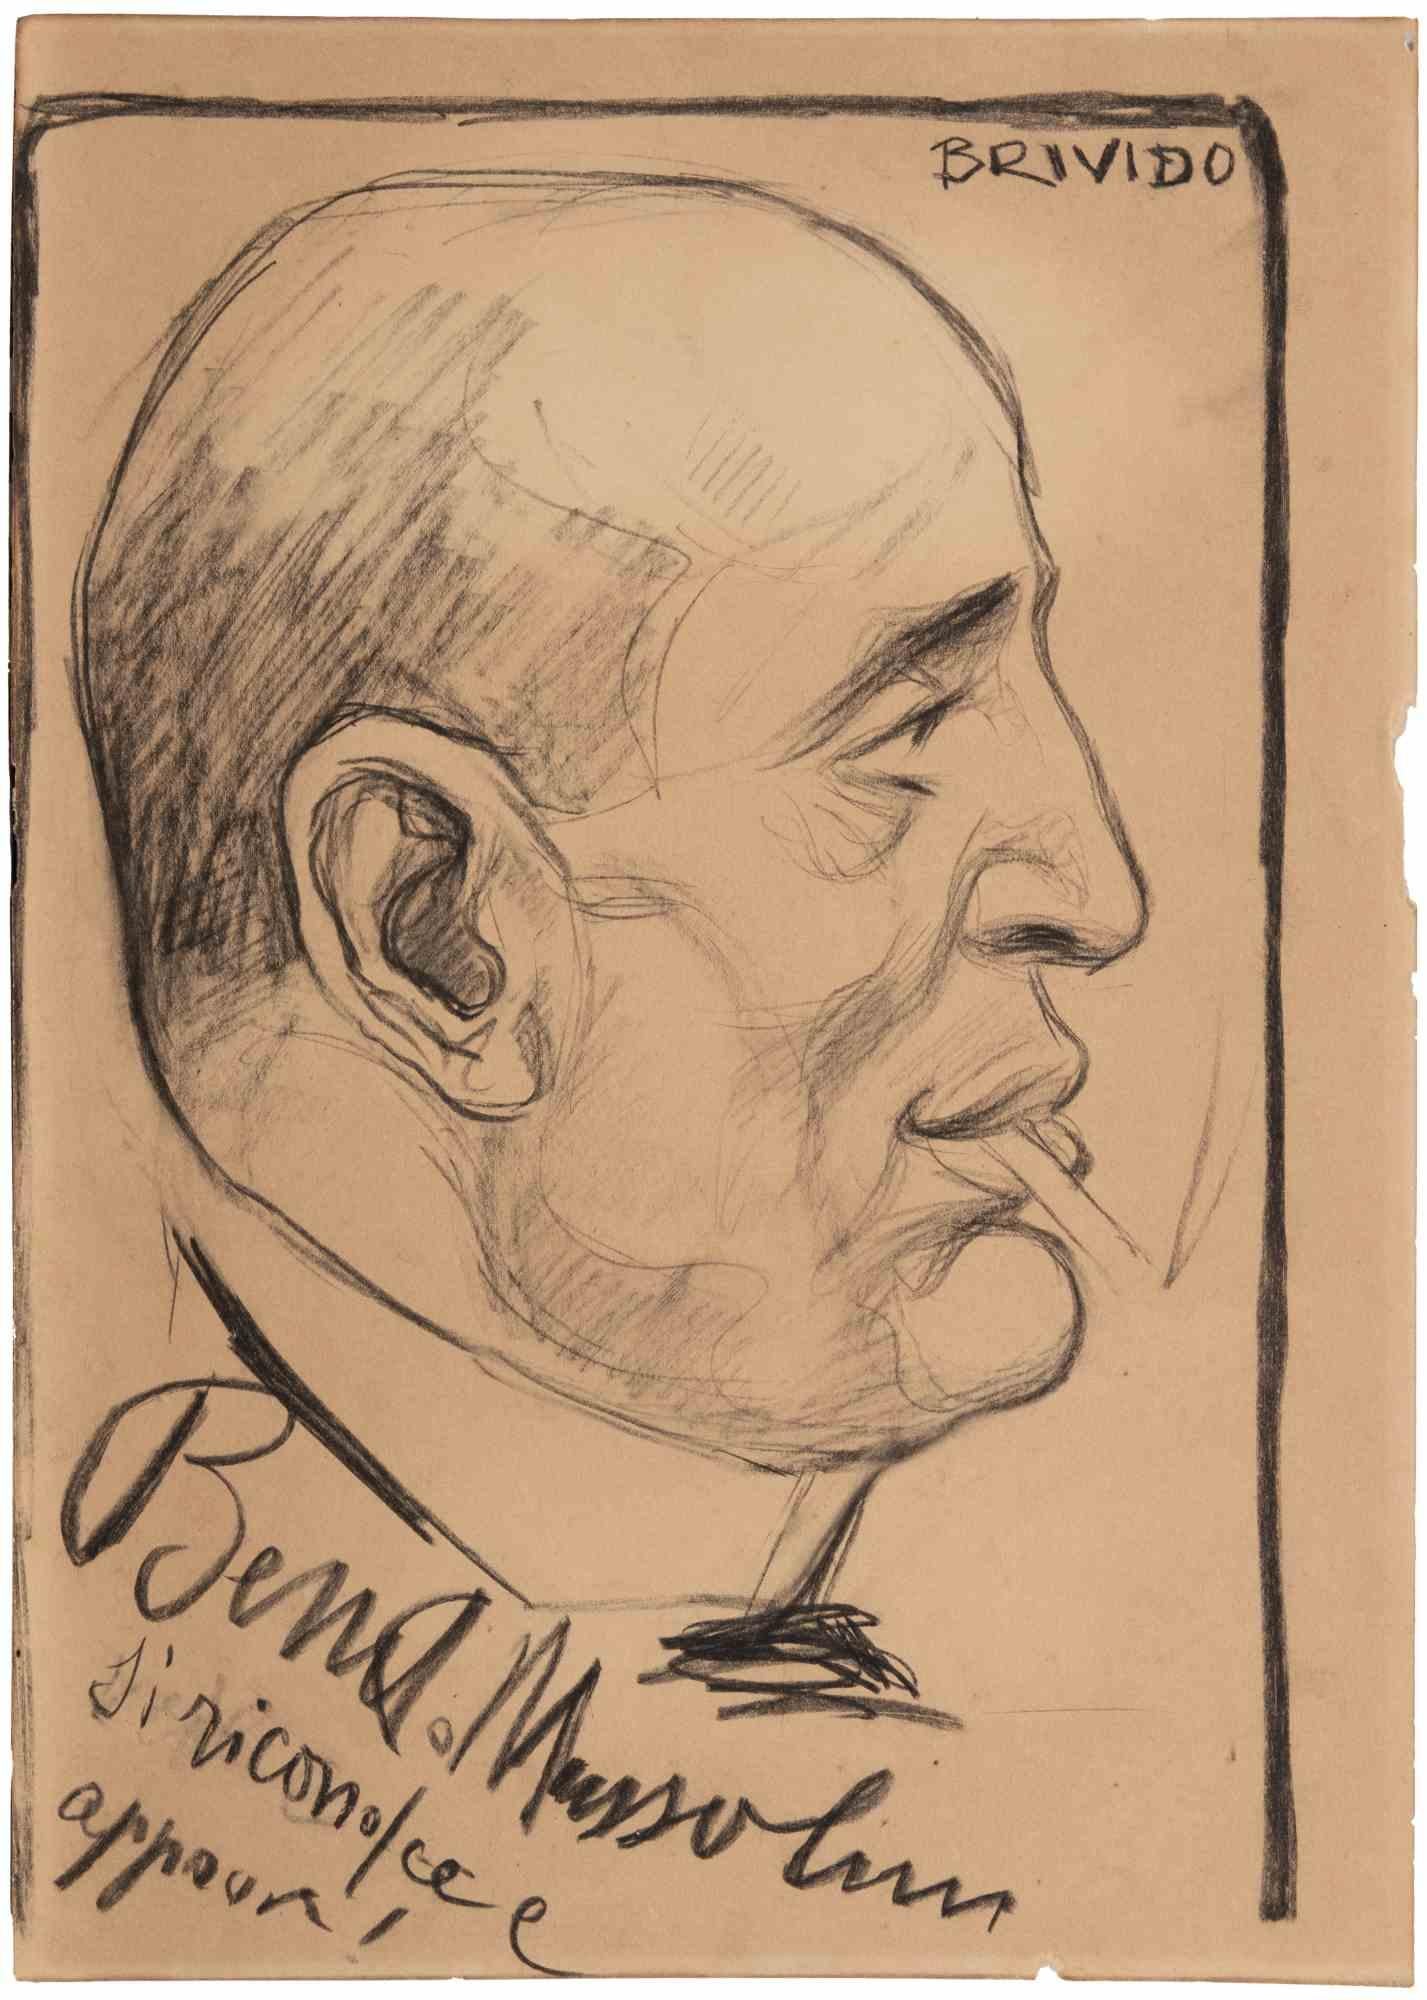 Duce Portrait is a modern artwork realized by the artist Alberto Manetti (known also as Brivido).

Pencil and charcoal on paper.

Hand signed on the higher right margin.

Inscription: "Benito Mussolini recognizes and approves!" lower left.

Artwork